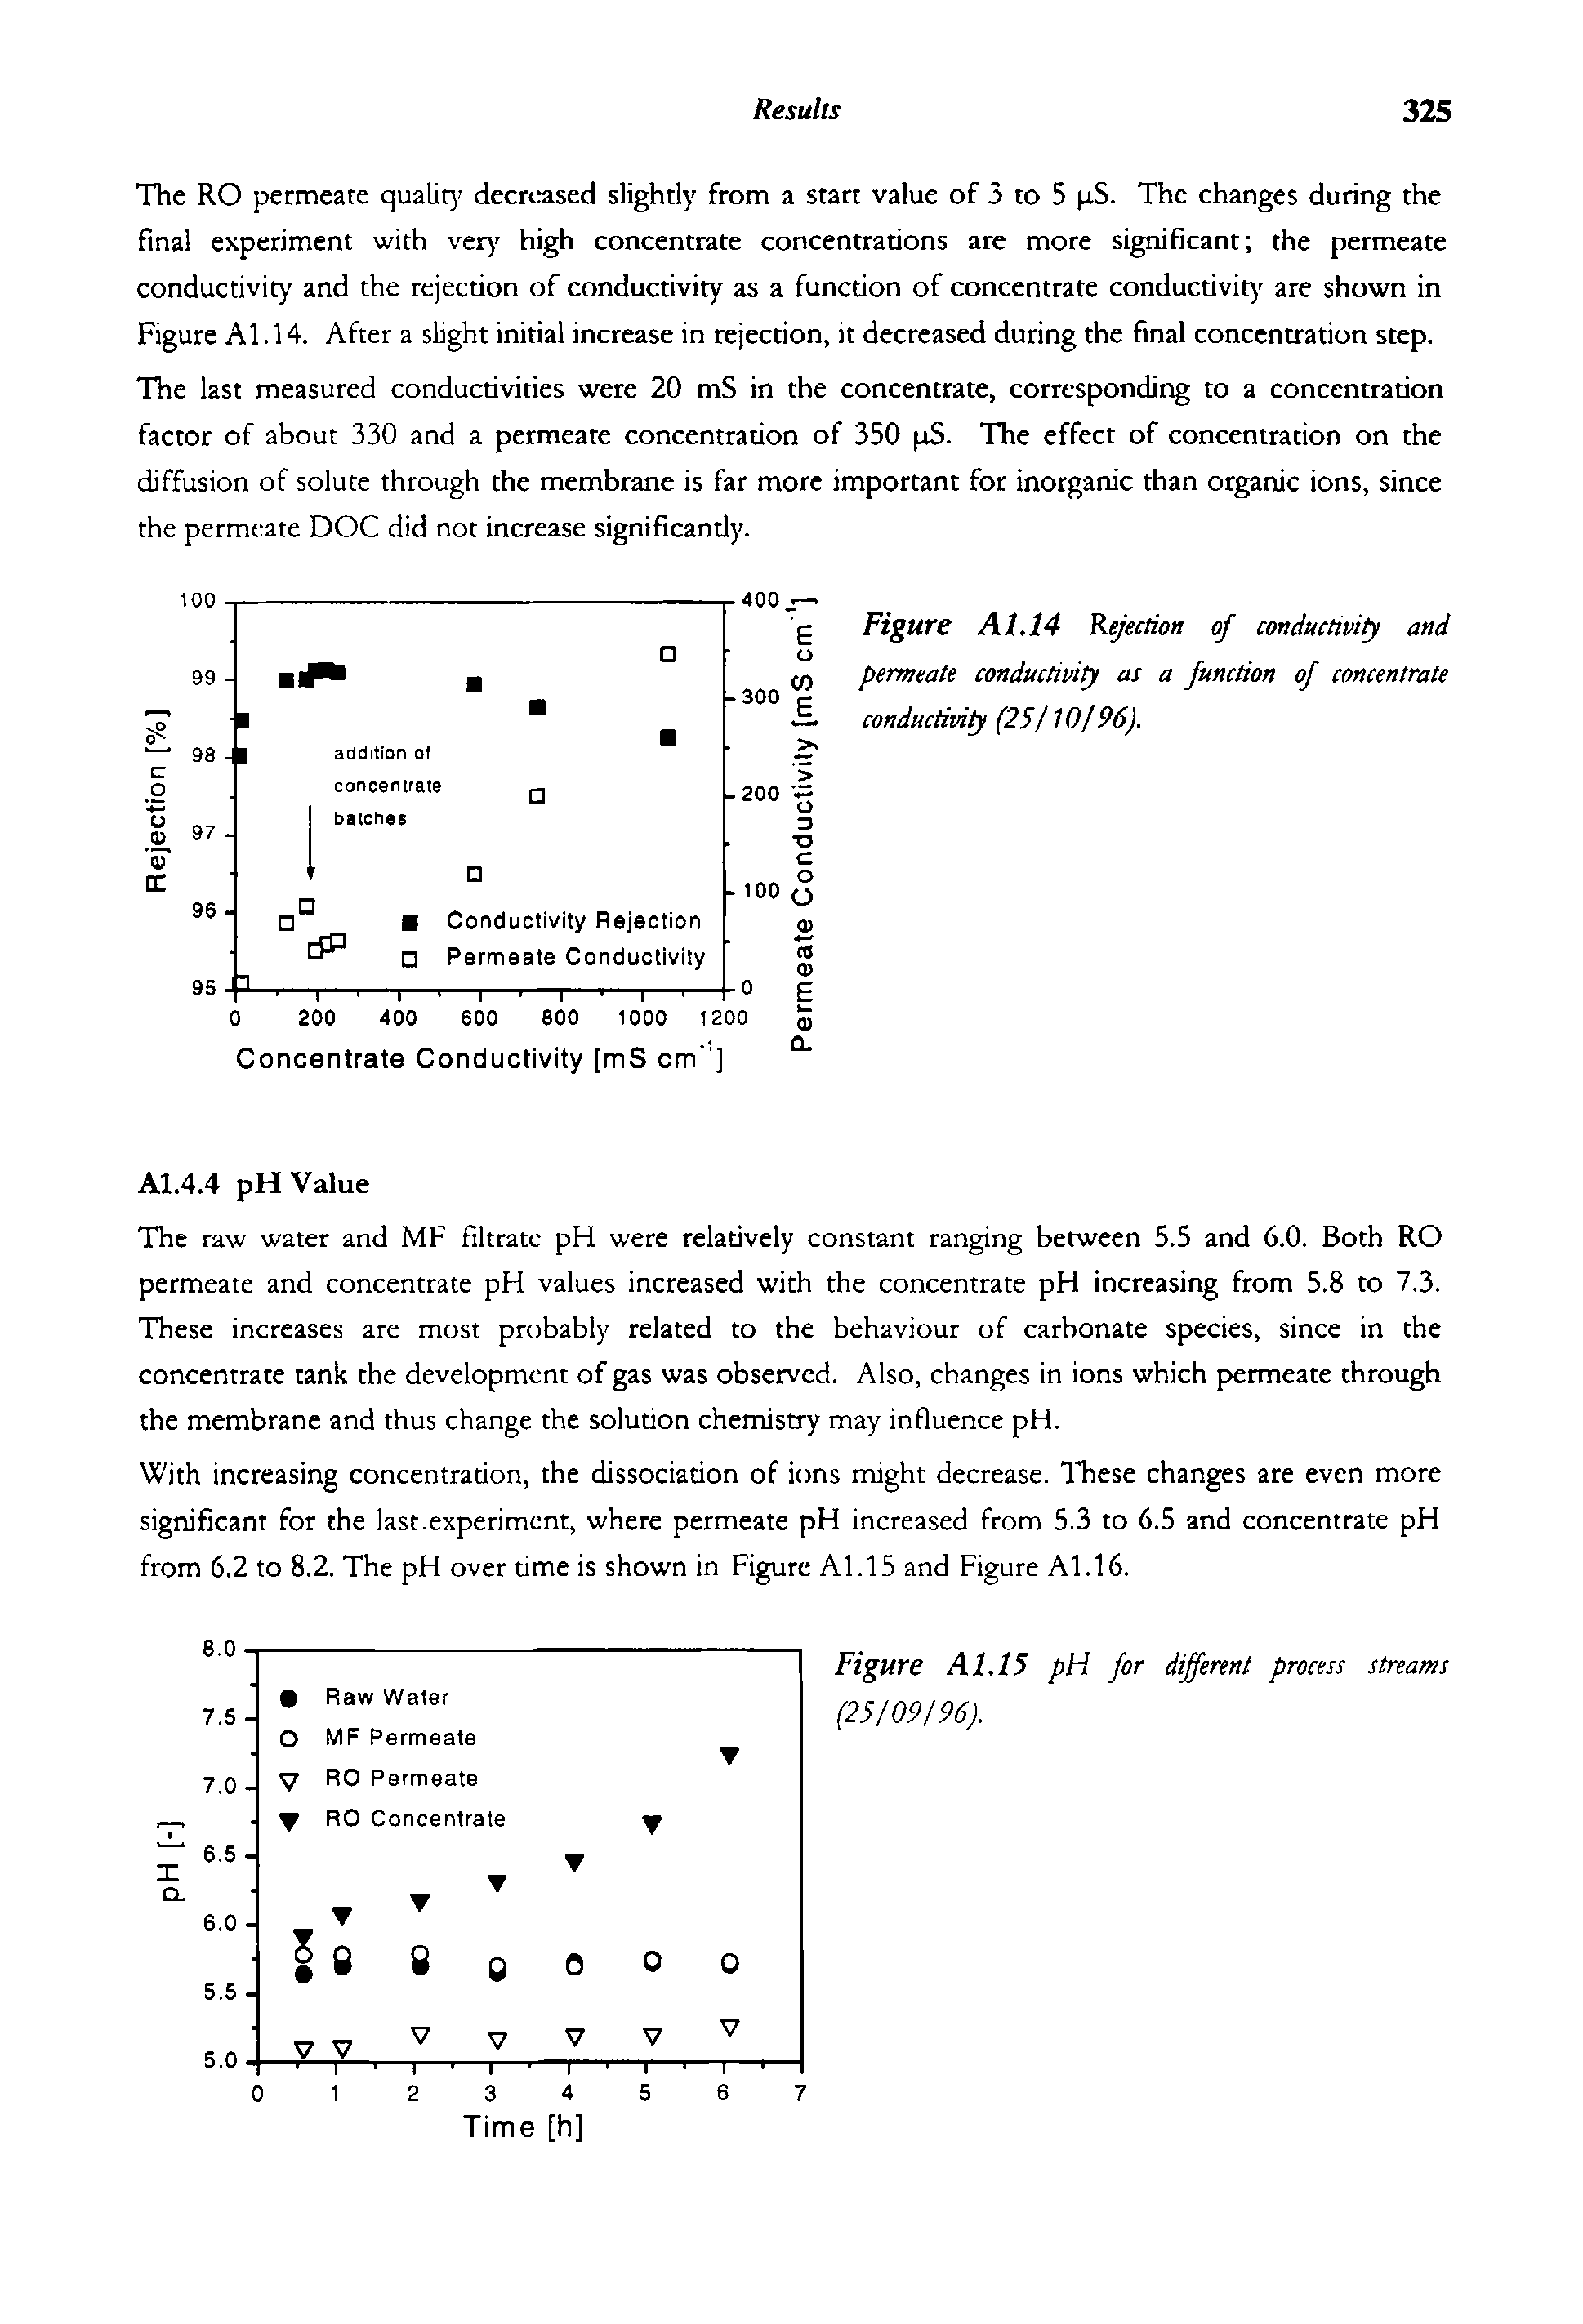 Figure A 1.14 Rejection of conductivity and permeate conductivity as a function of concentrate conductivity (25 10196).